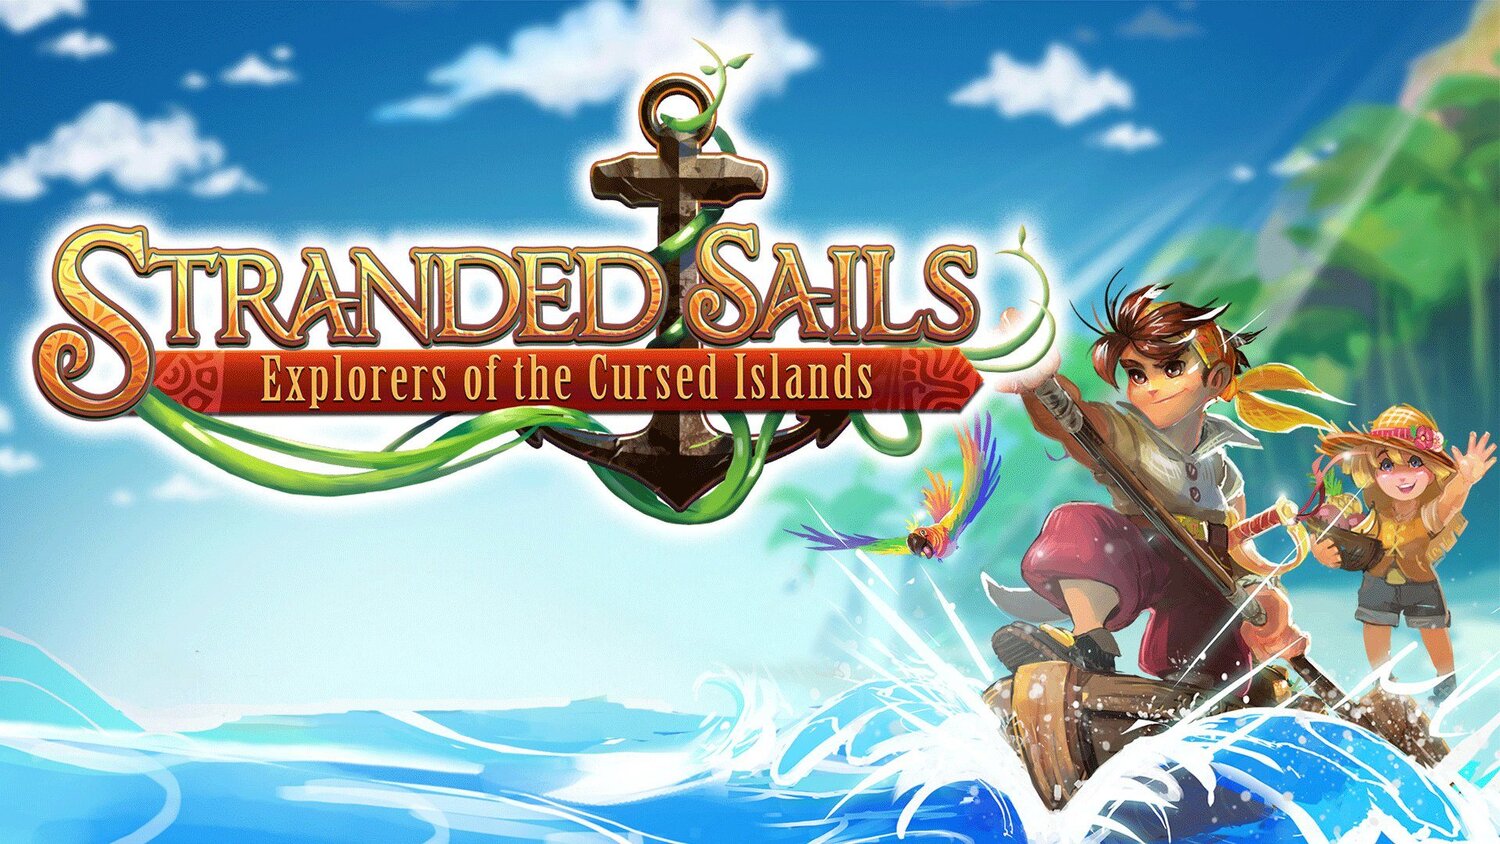 Stranded Sails: Explorers of the Cursed Islands PAX West 2019 Impression -  RPGamer